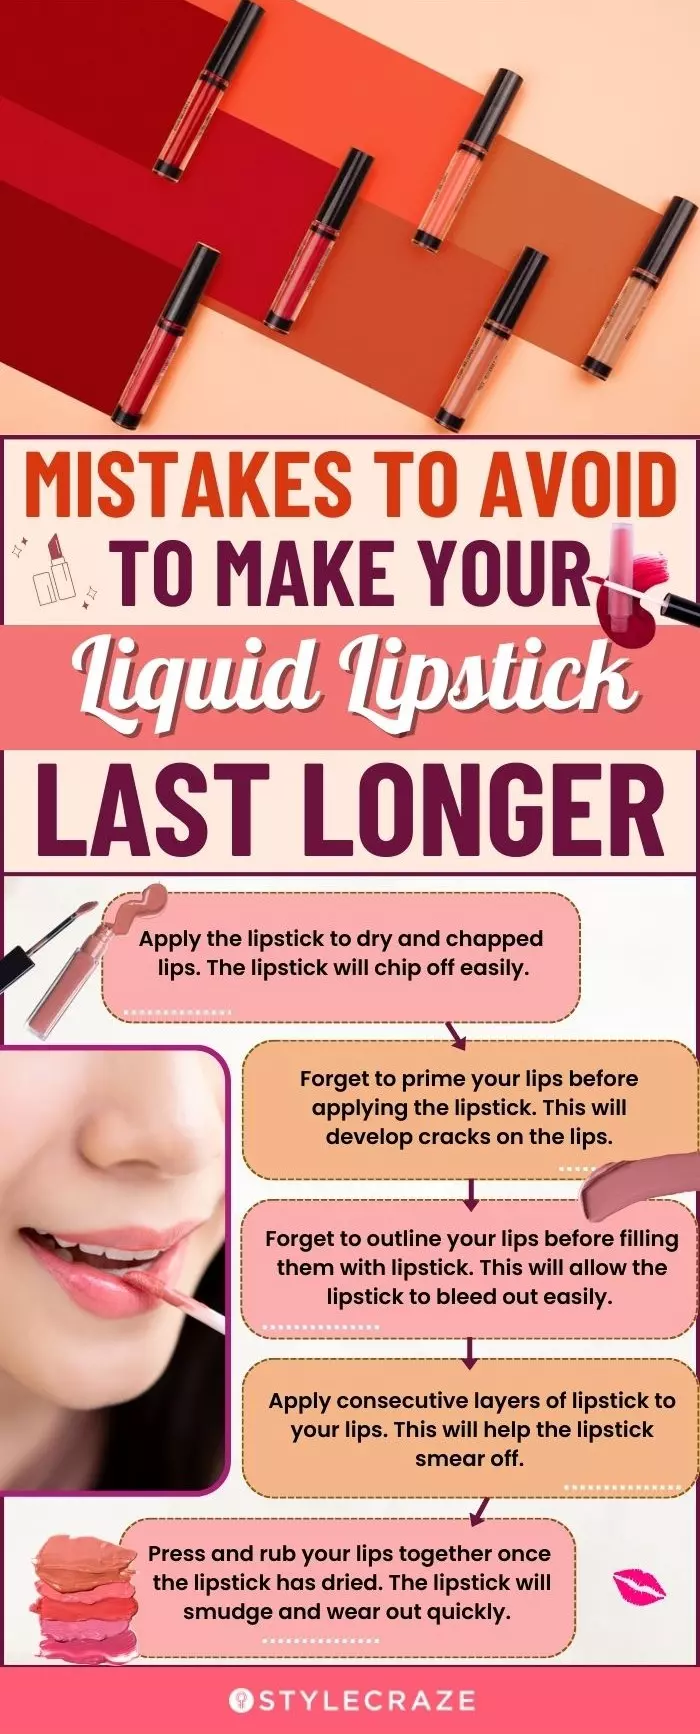 Mistakes To Avoid To Make Your Liquid Lipstick Last Longer (infographic)